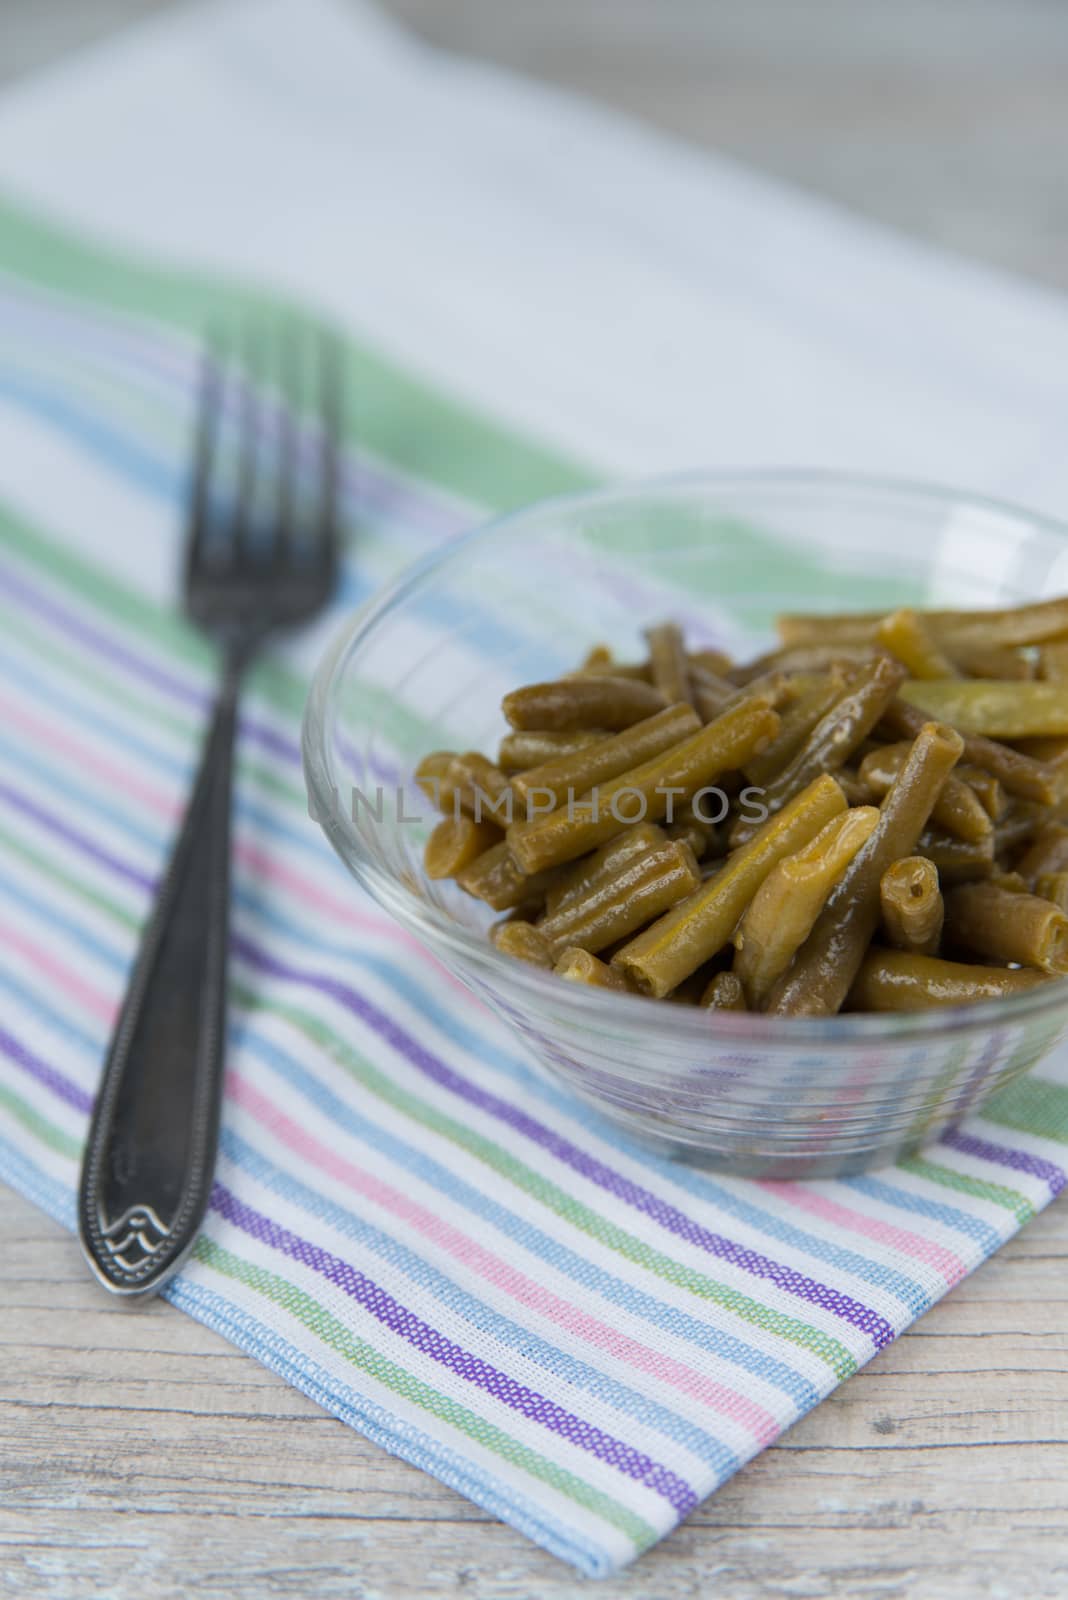 Plate of the prepared green beans and fork on the napkin